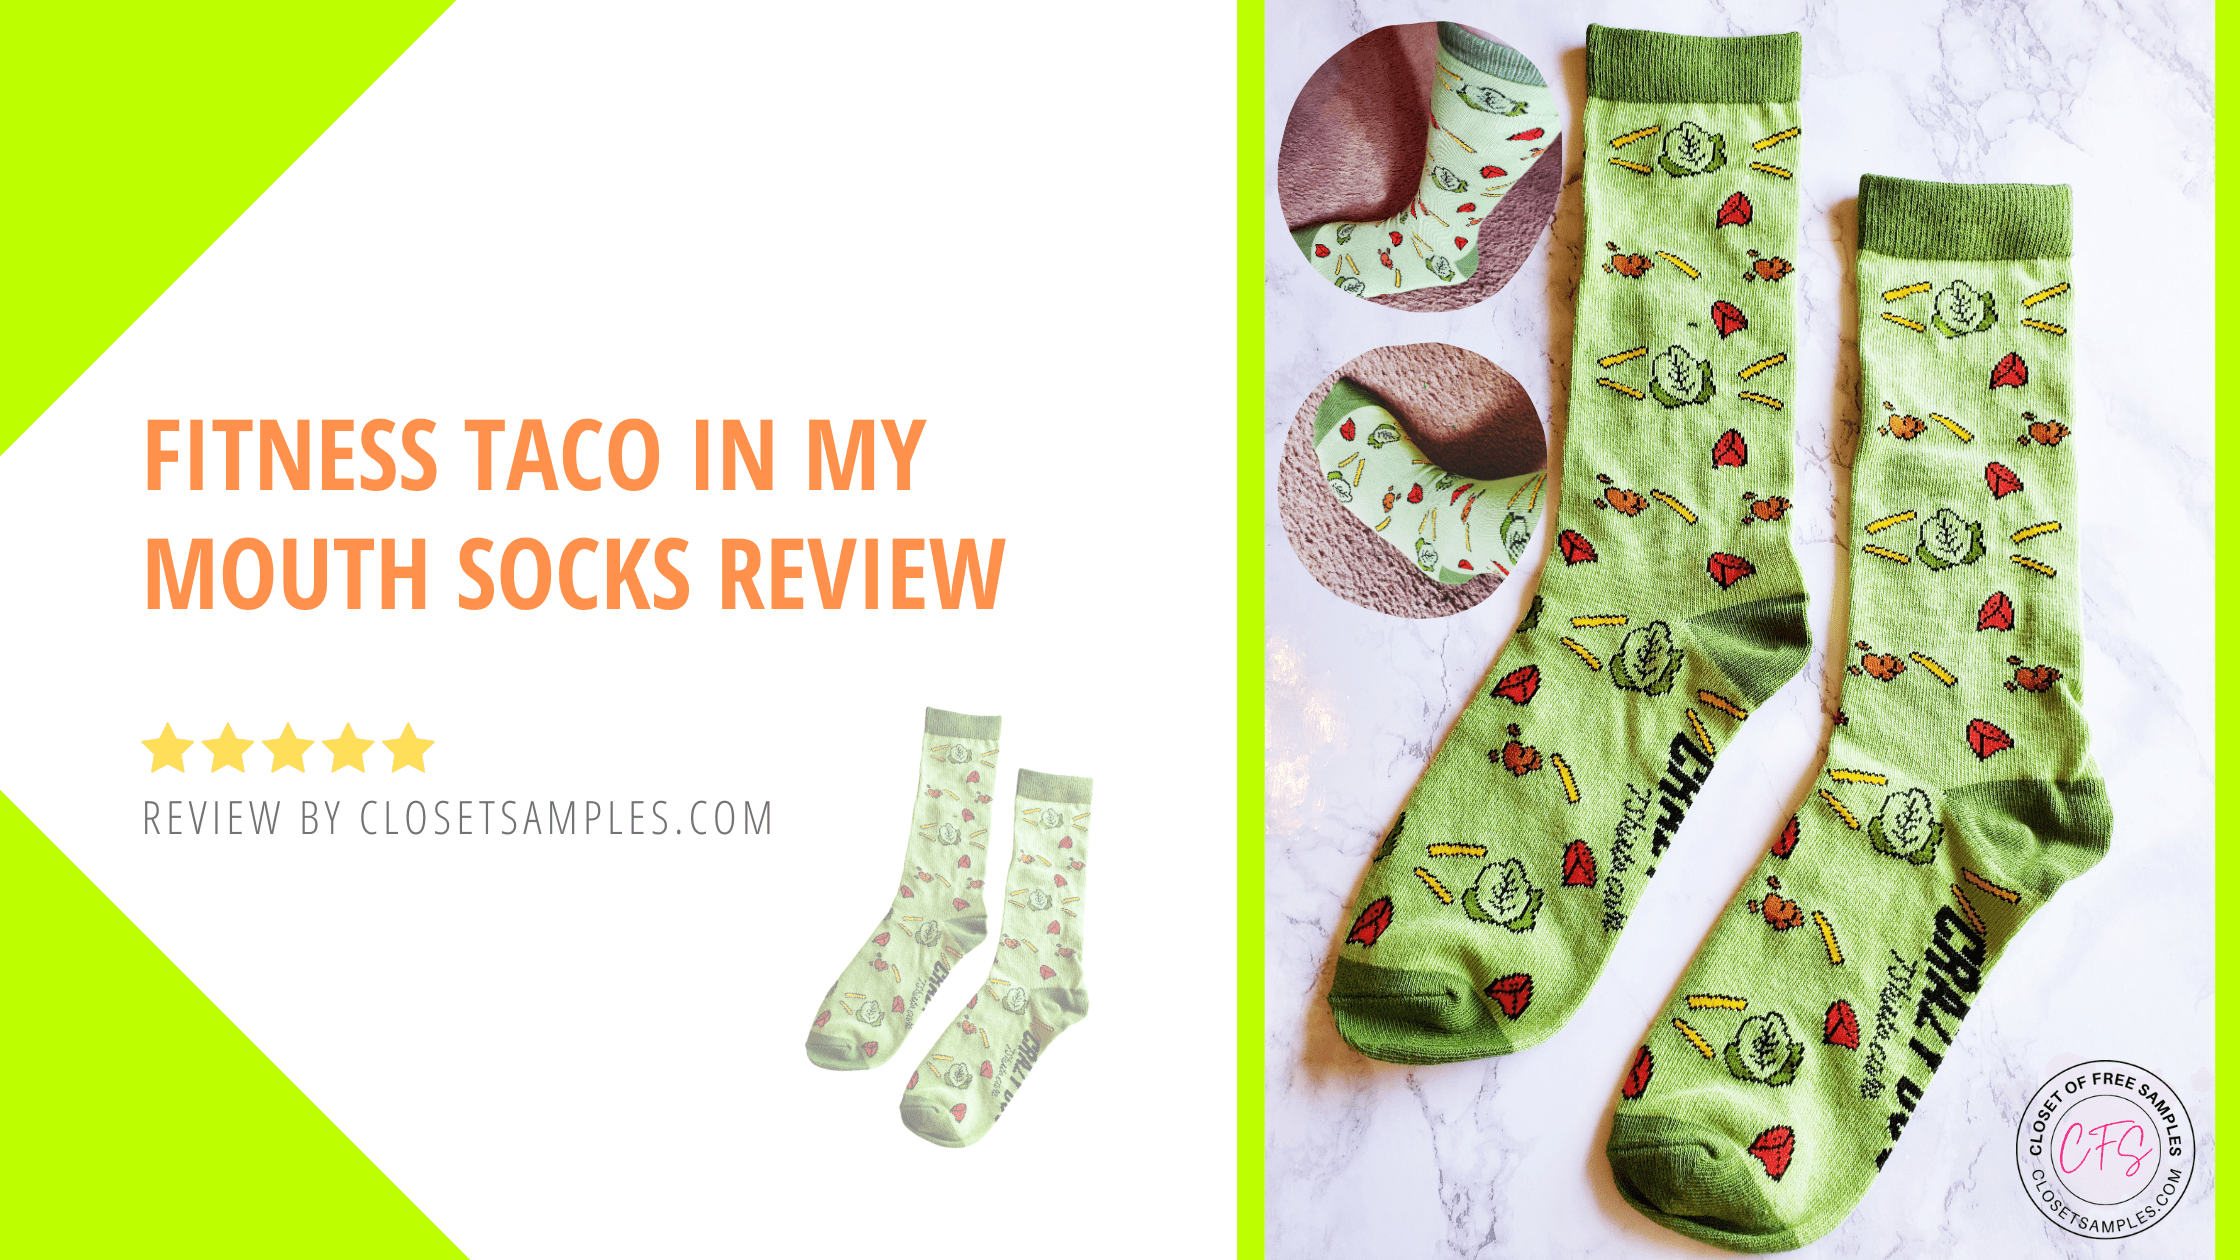 Fitness-Taco-In-My-Mouth-Sock-from-Nerdyshirts-Review-closetsamples.png